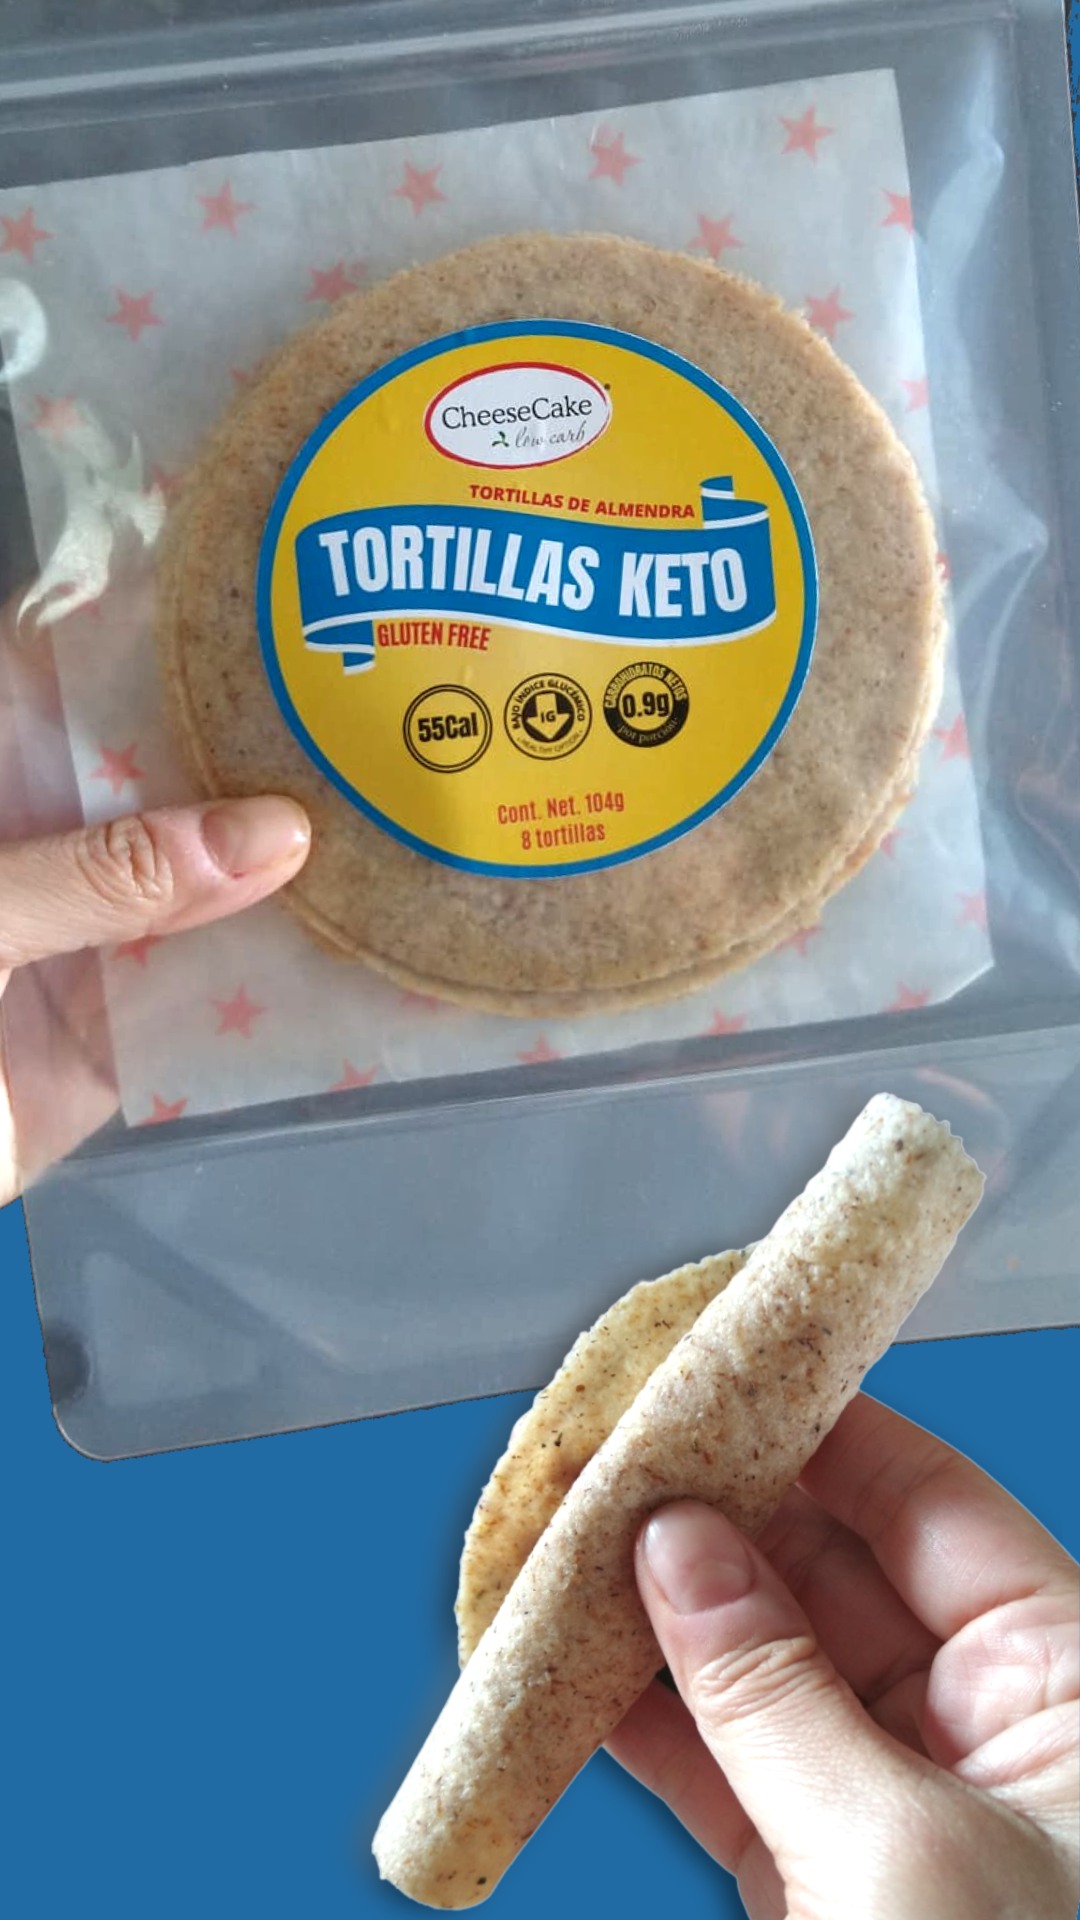 Keto Tortillas (express shipping only, refrigeration required)